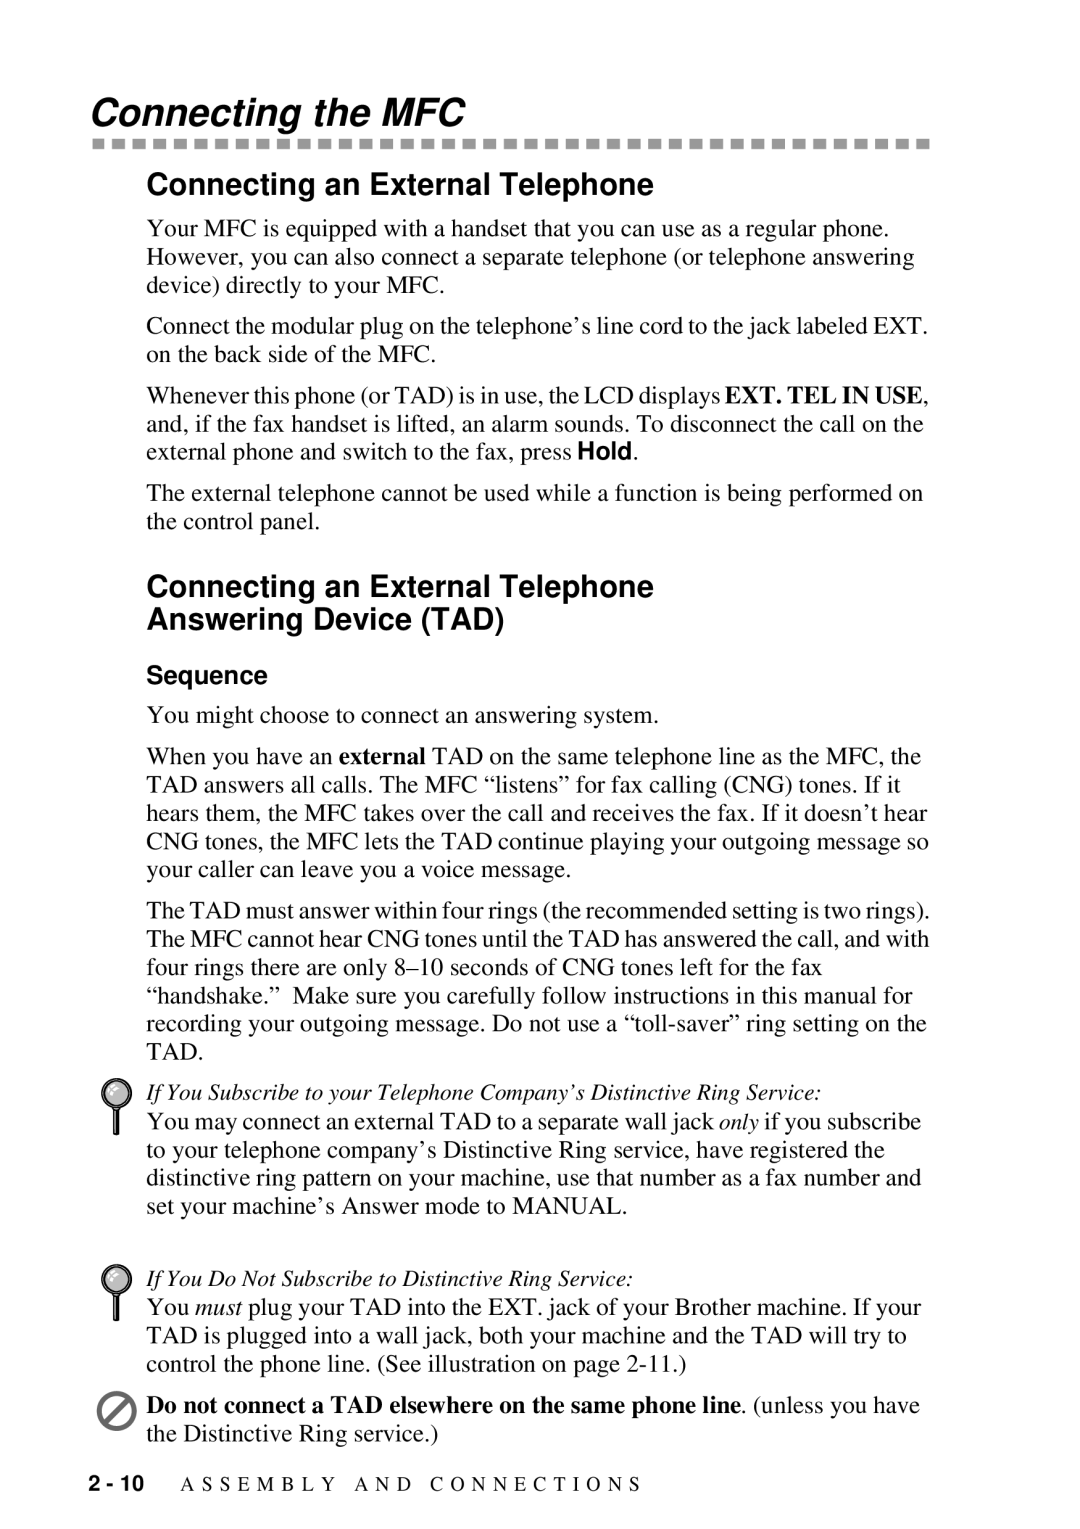 Brother MFC-7300C manual Connecting the MFC, Connecting an External Telephone, Sequence 